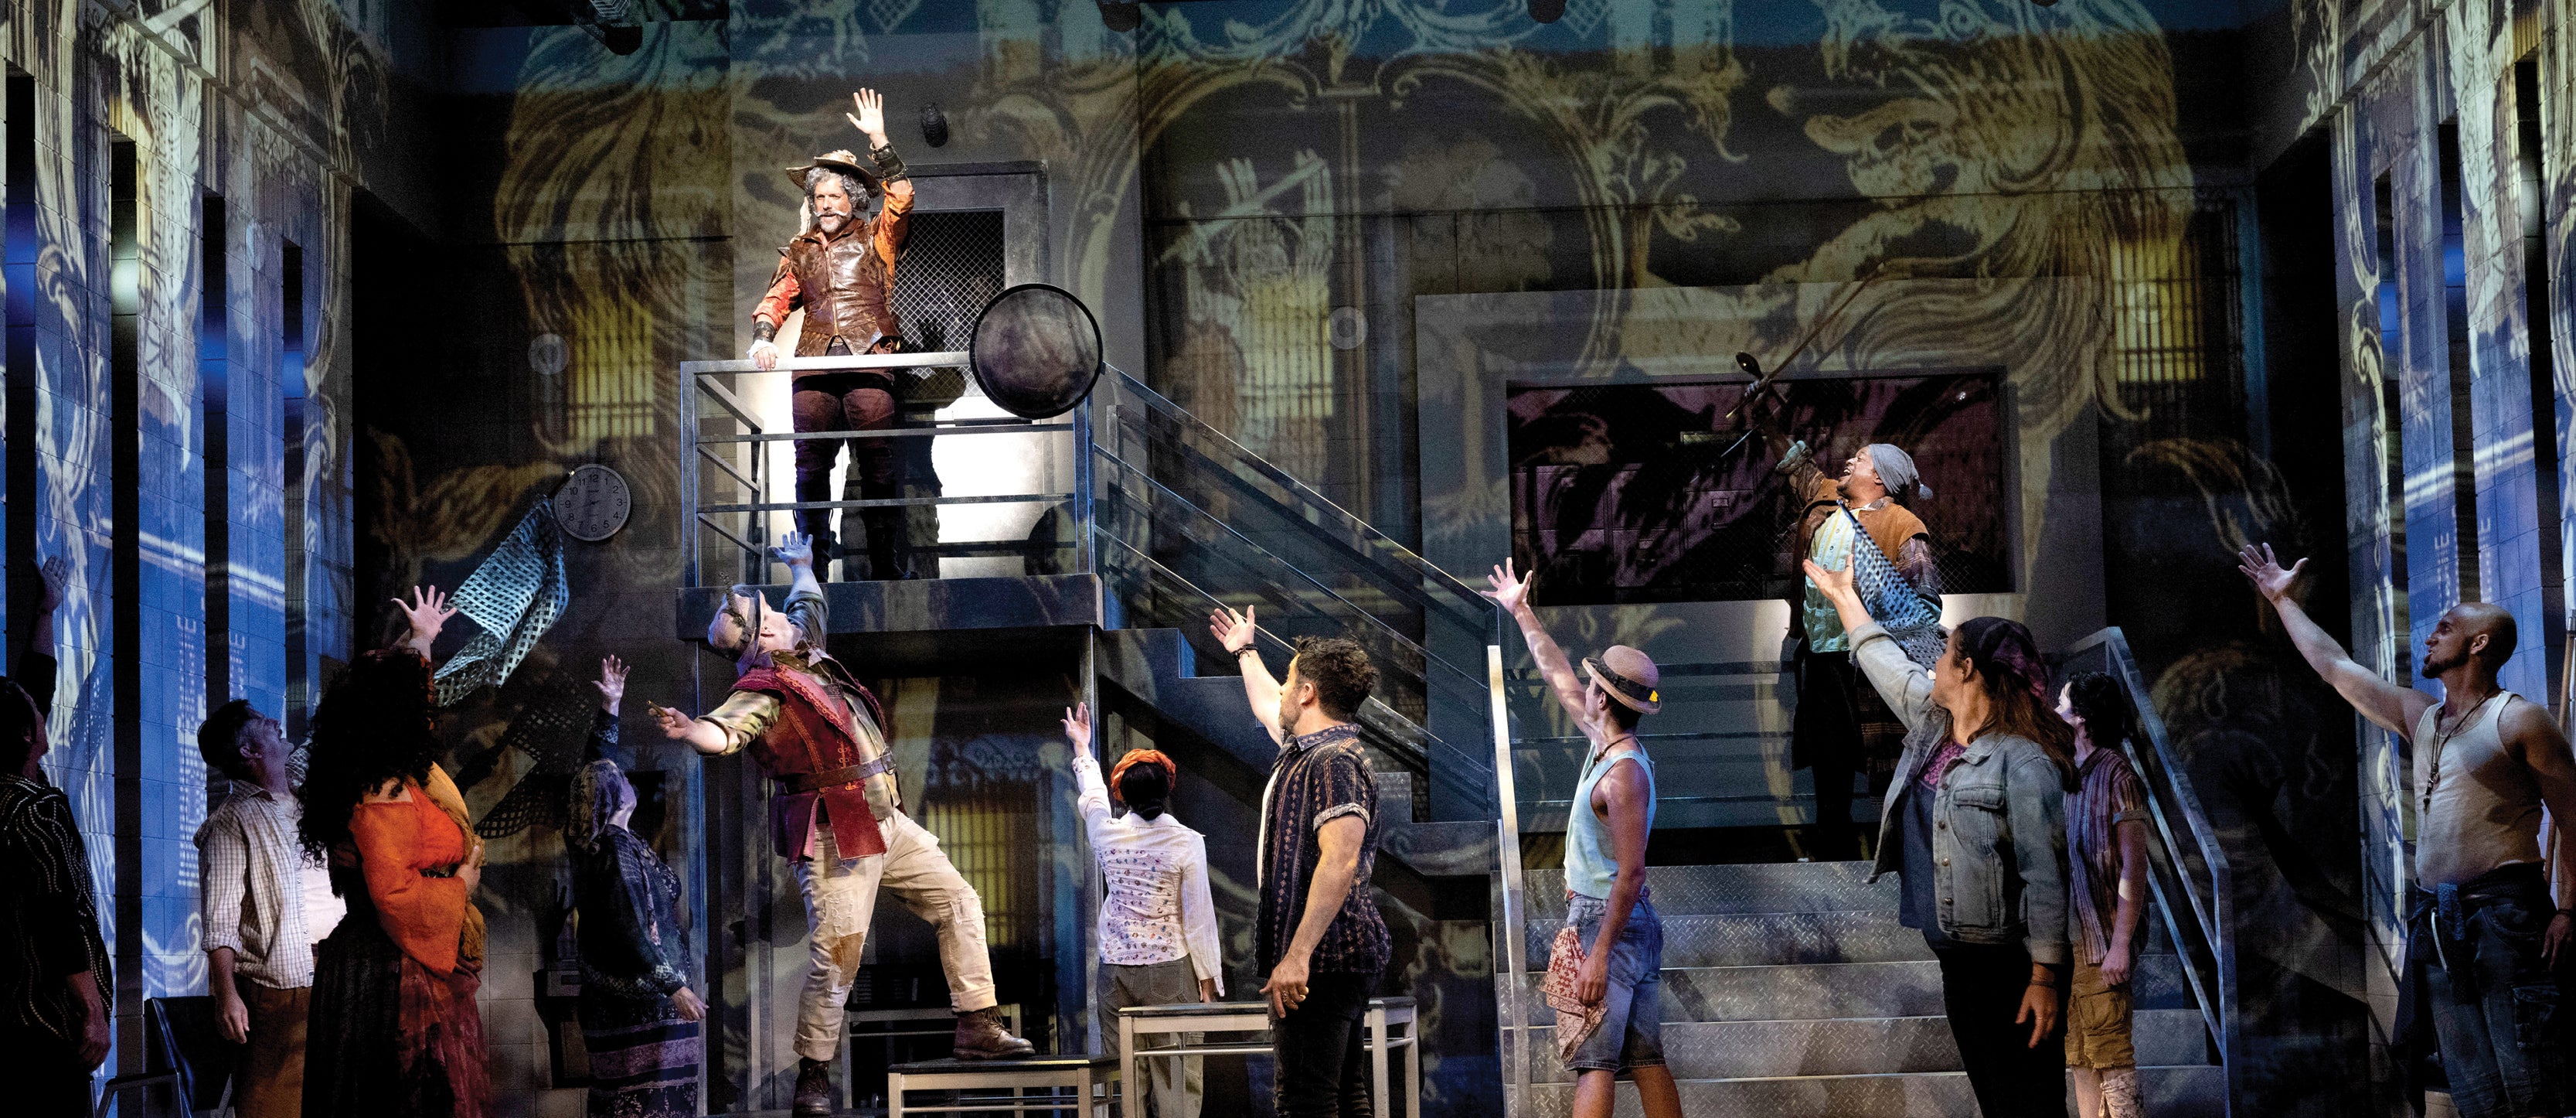 Capitol Best 2023-2024: My Fair Lady - The Capitol Theatre